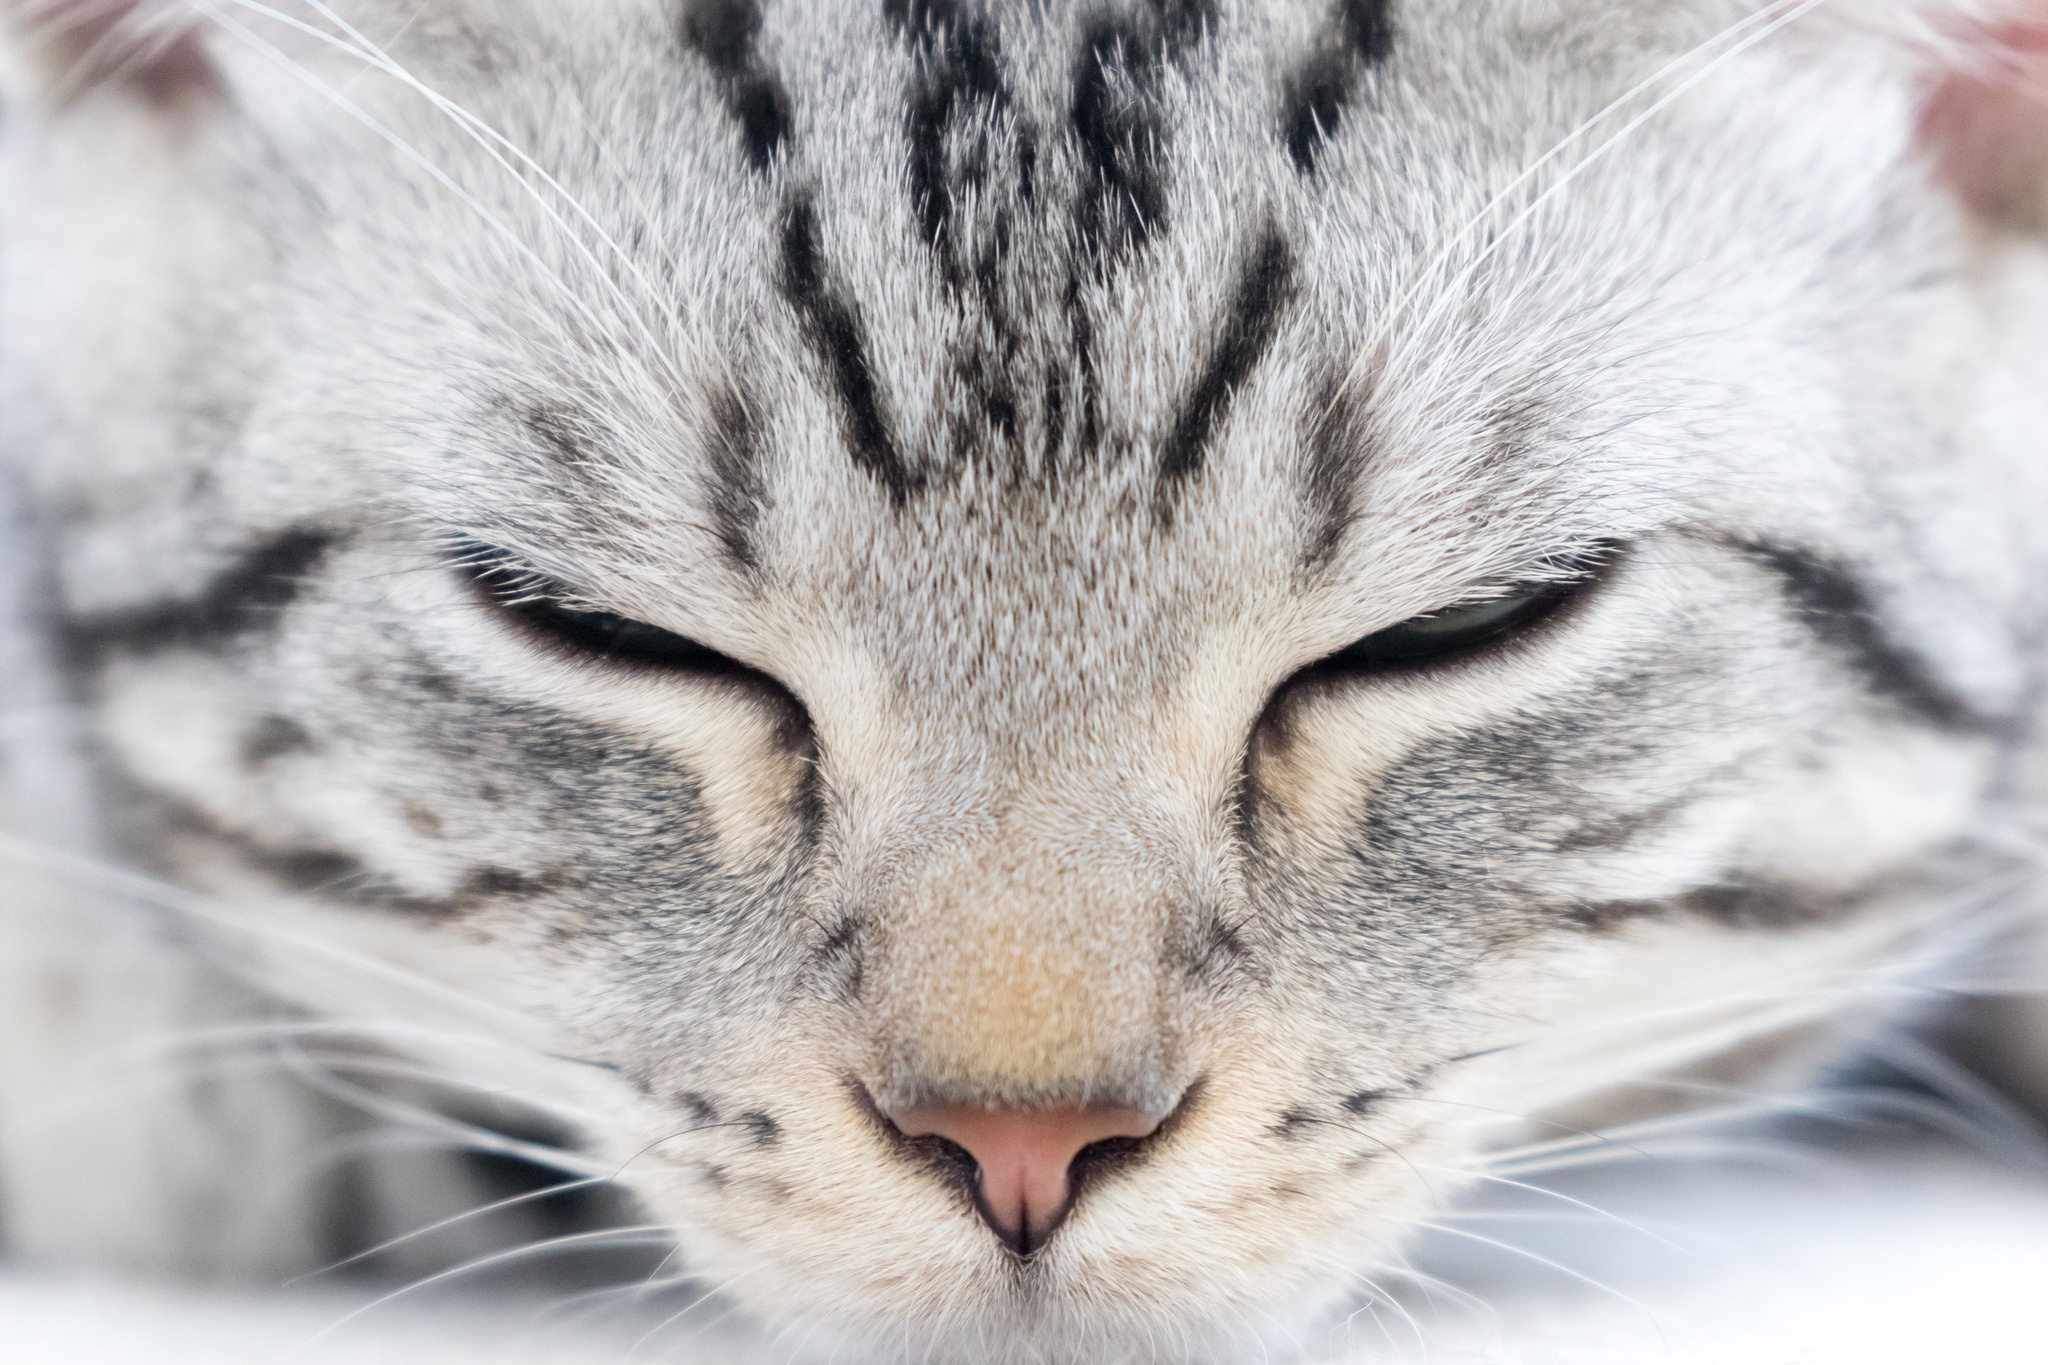 Free download wallpaper Cats, Cat, Close Up, Animal, Sleeping on your PC desktop